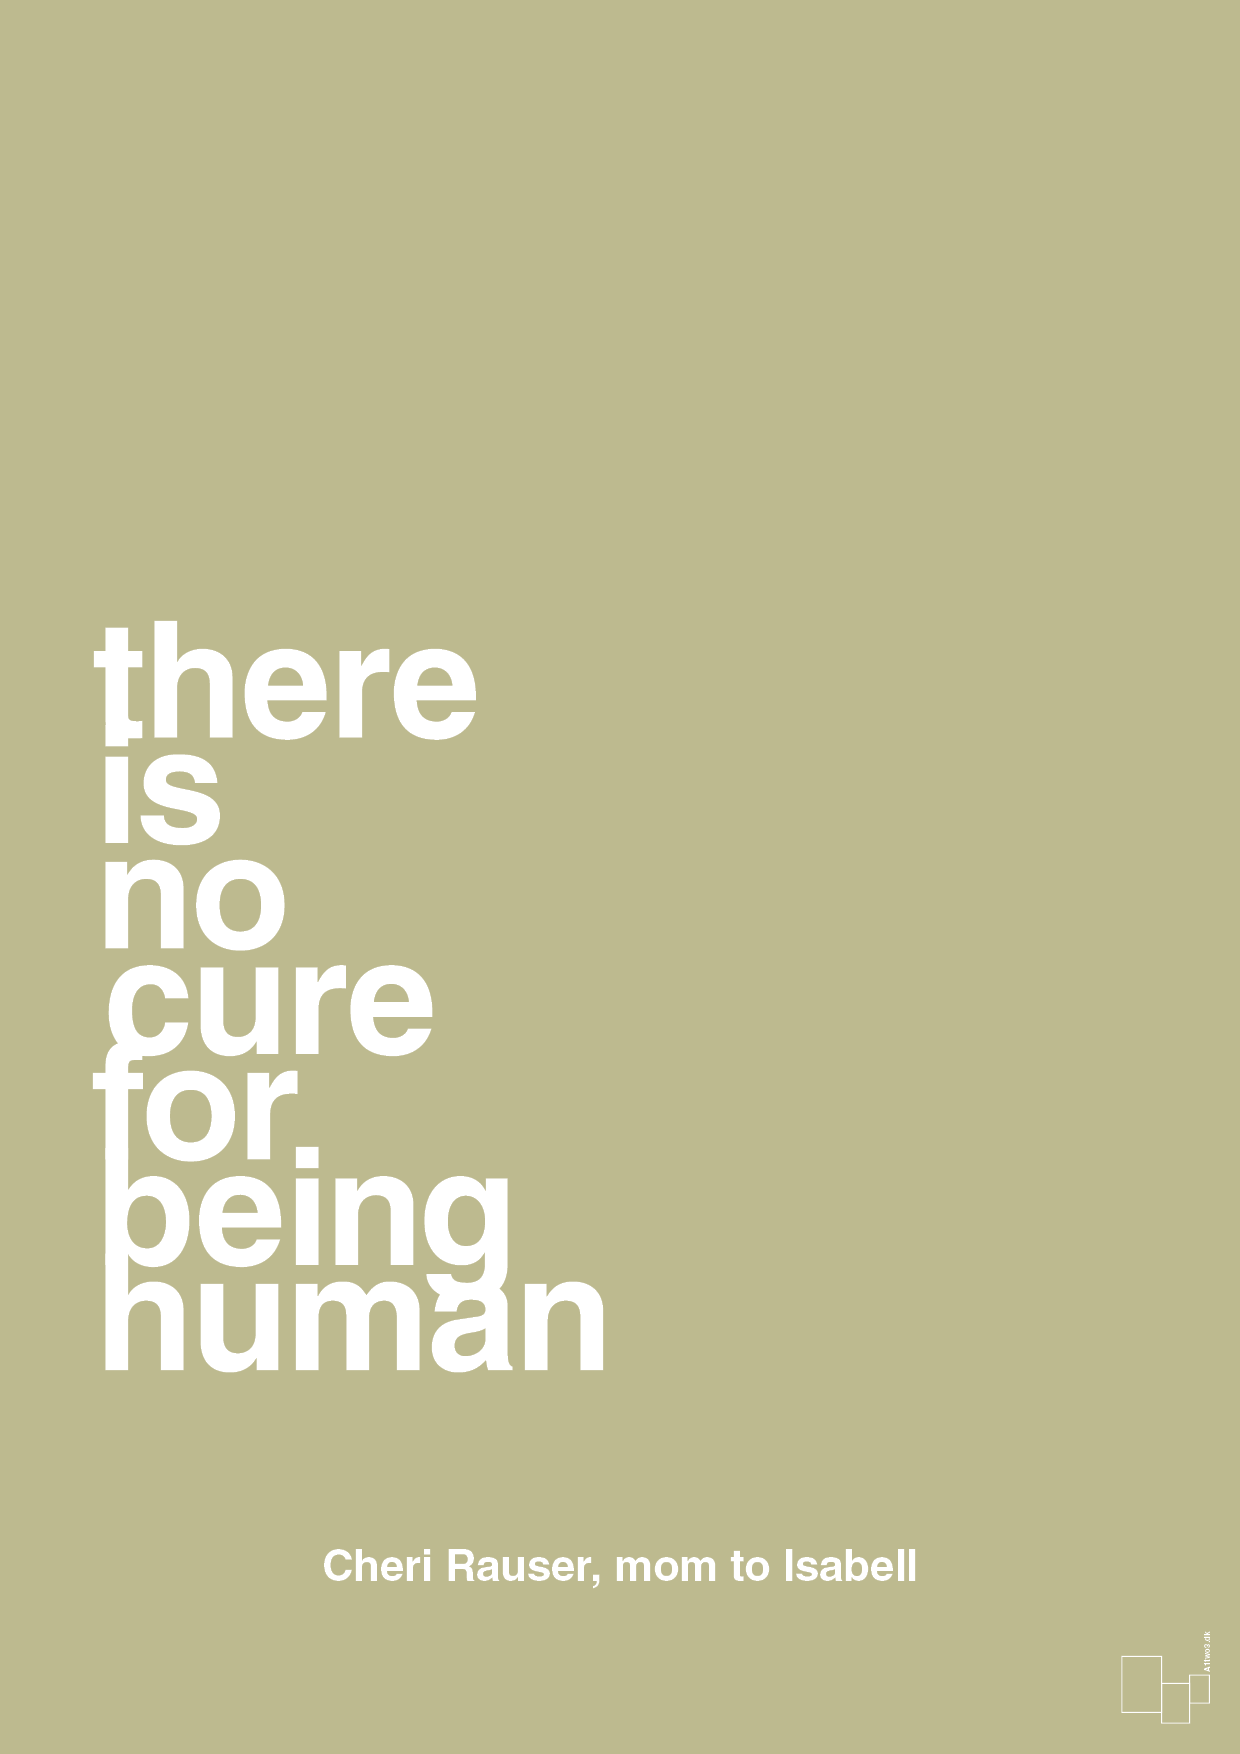 there is no cure for being human - Plakat med Samfund i Back to Nature